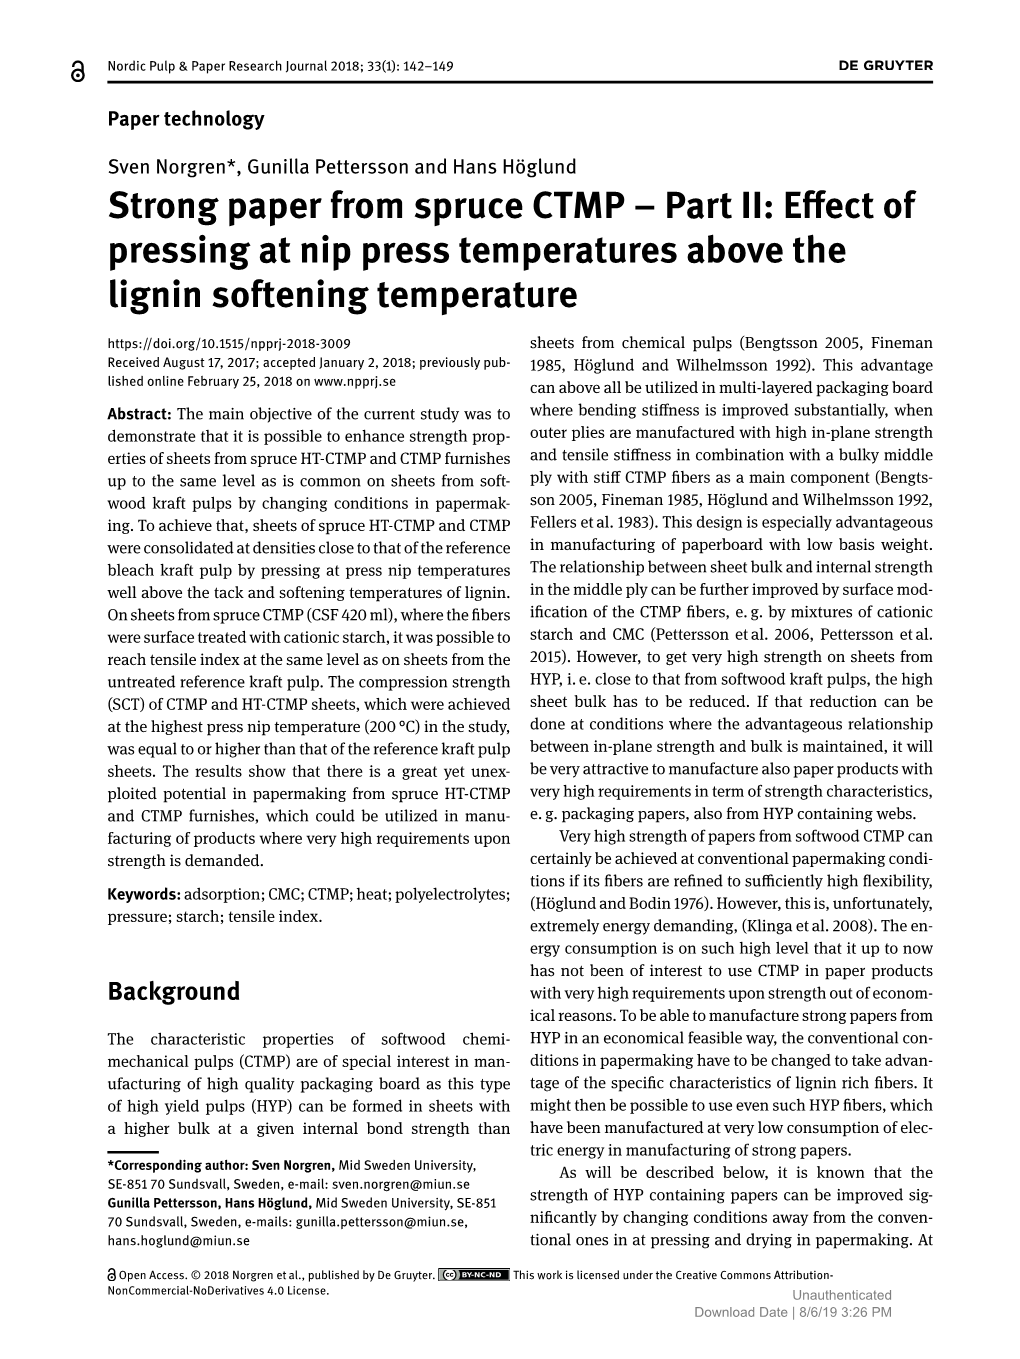 Strong Paper from Spruce CTMP